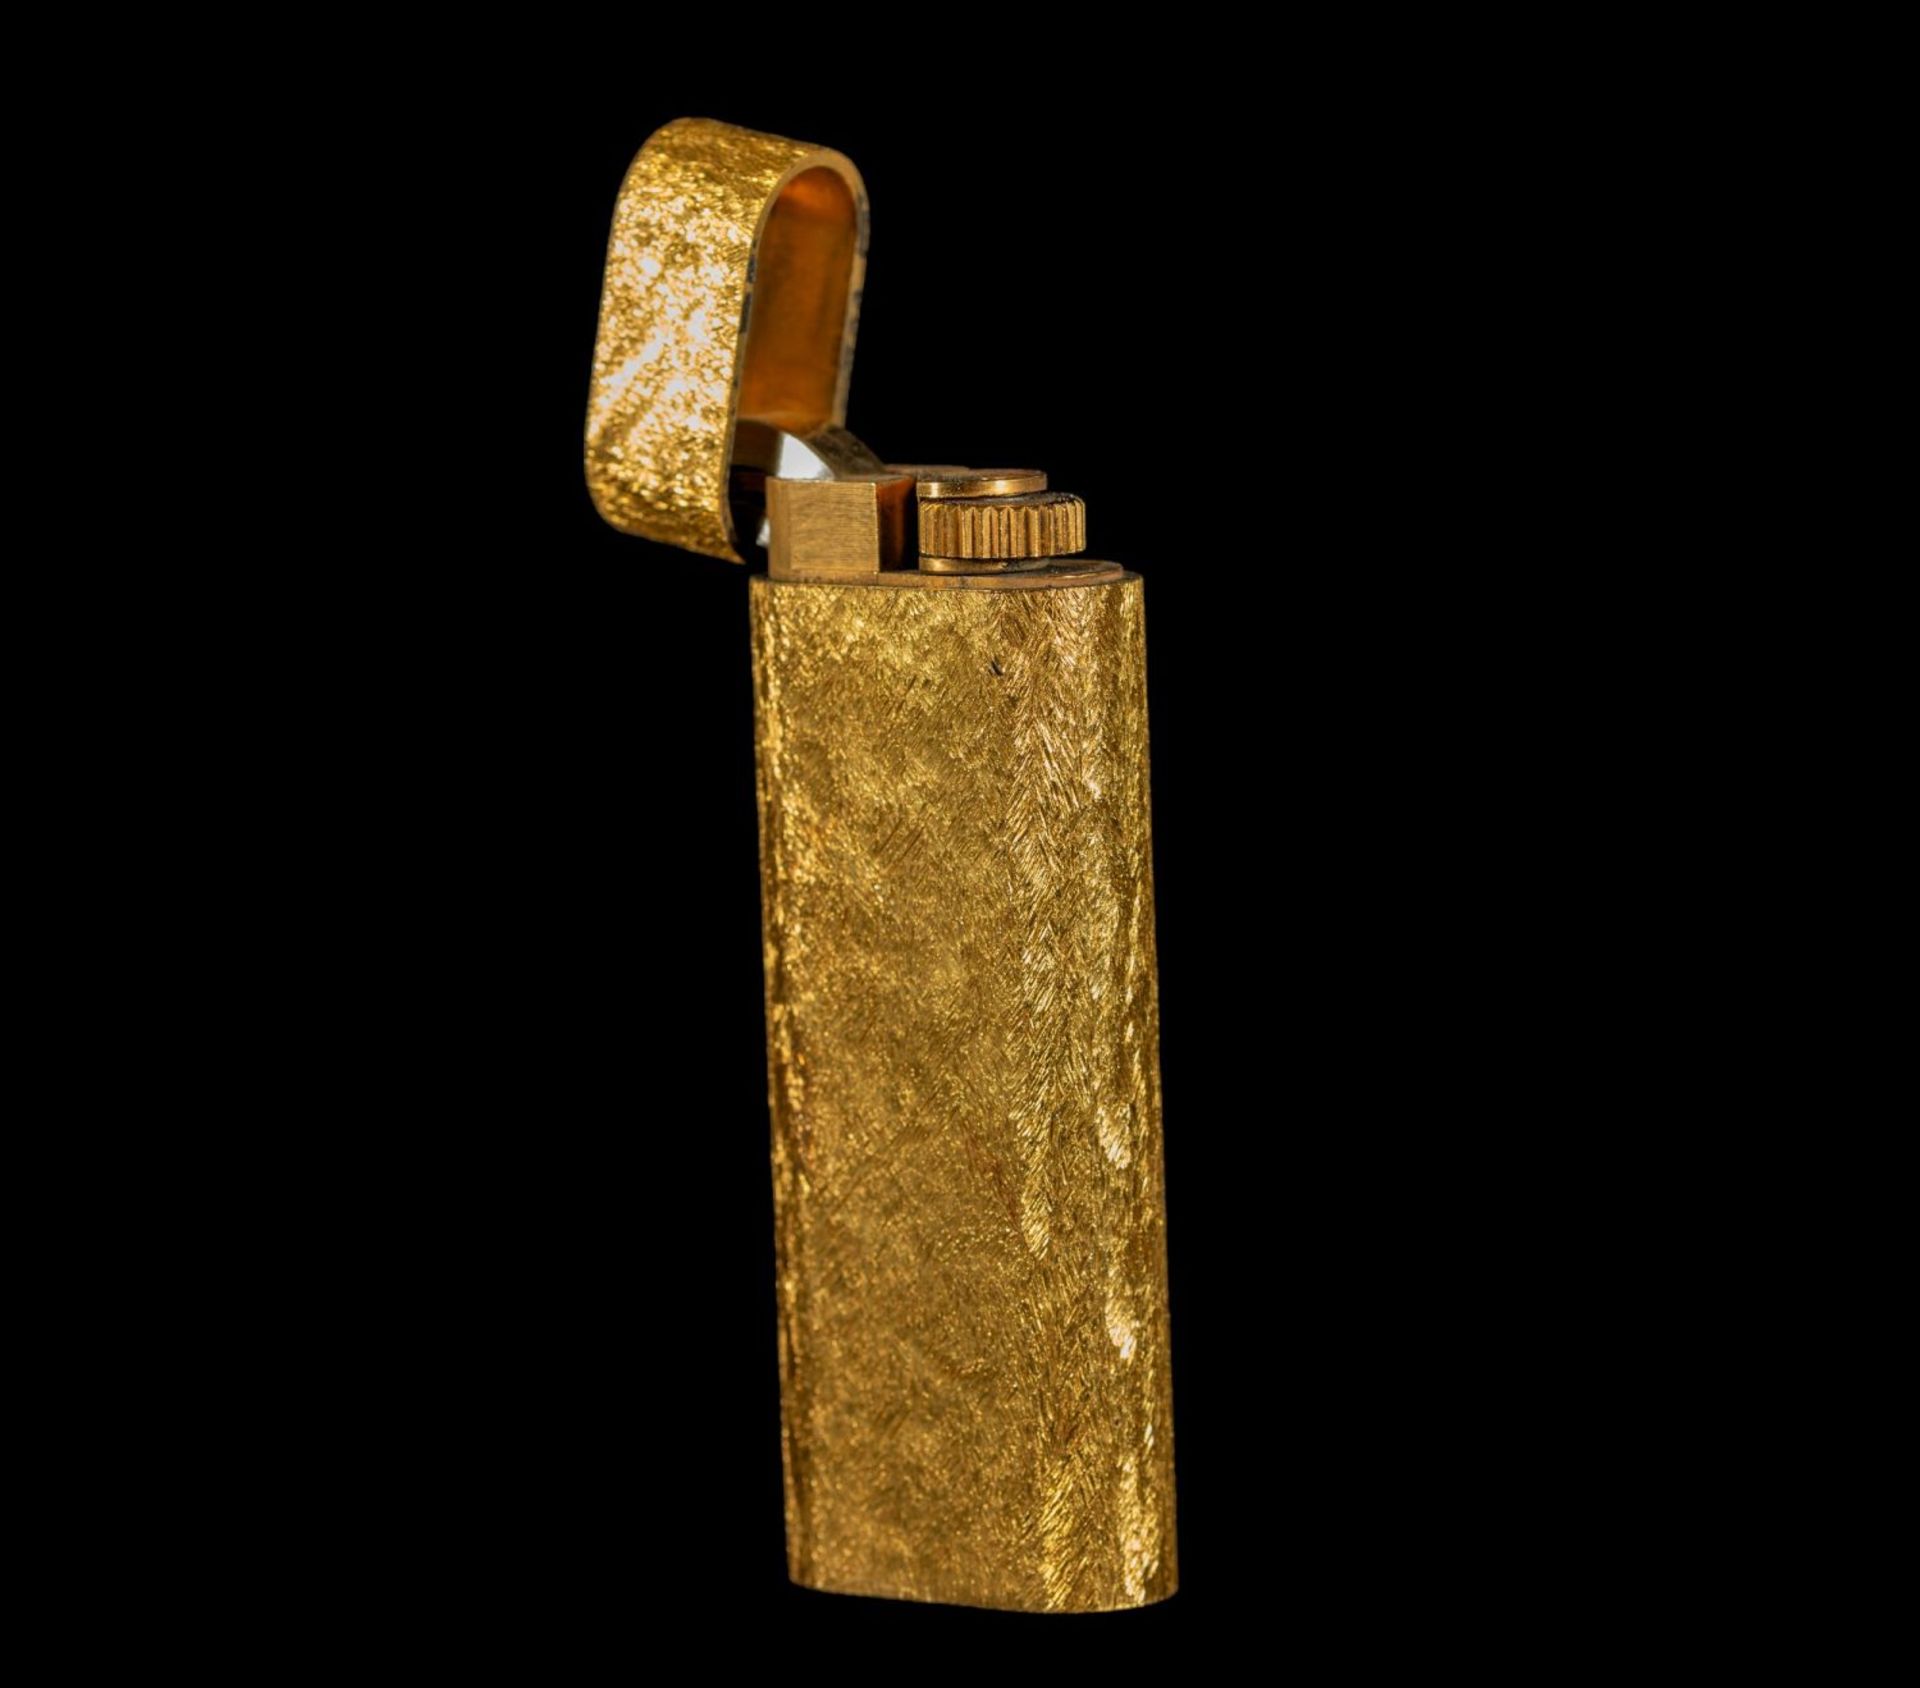 Cartier lighter in 20 micron gold plated, 1970s - Image 2 of 3